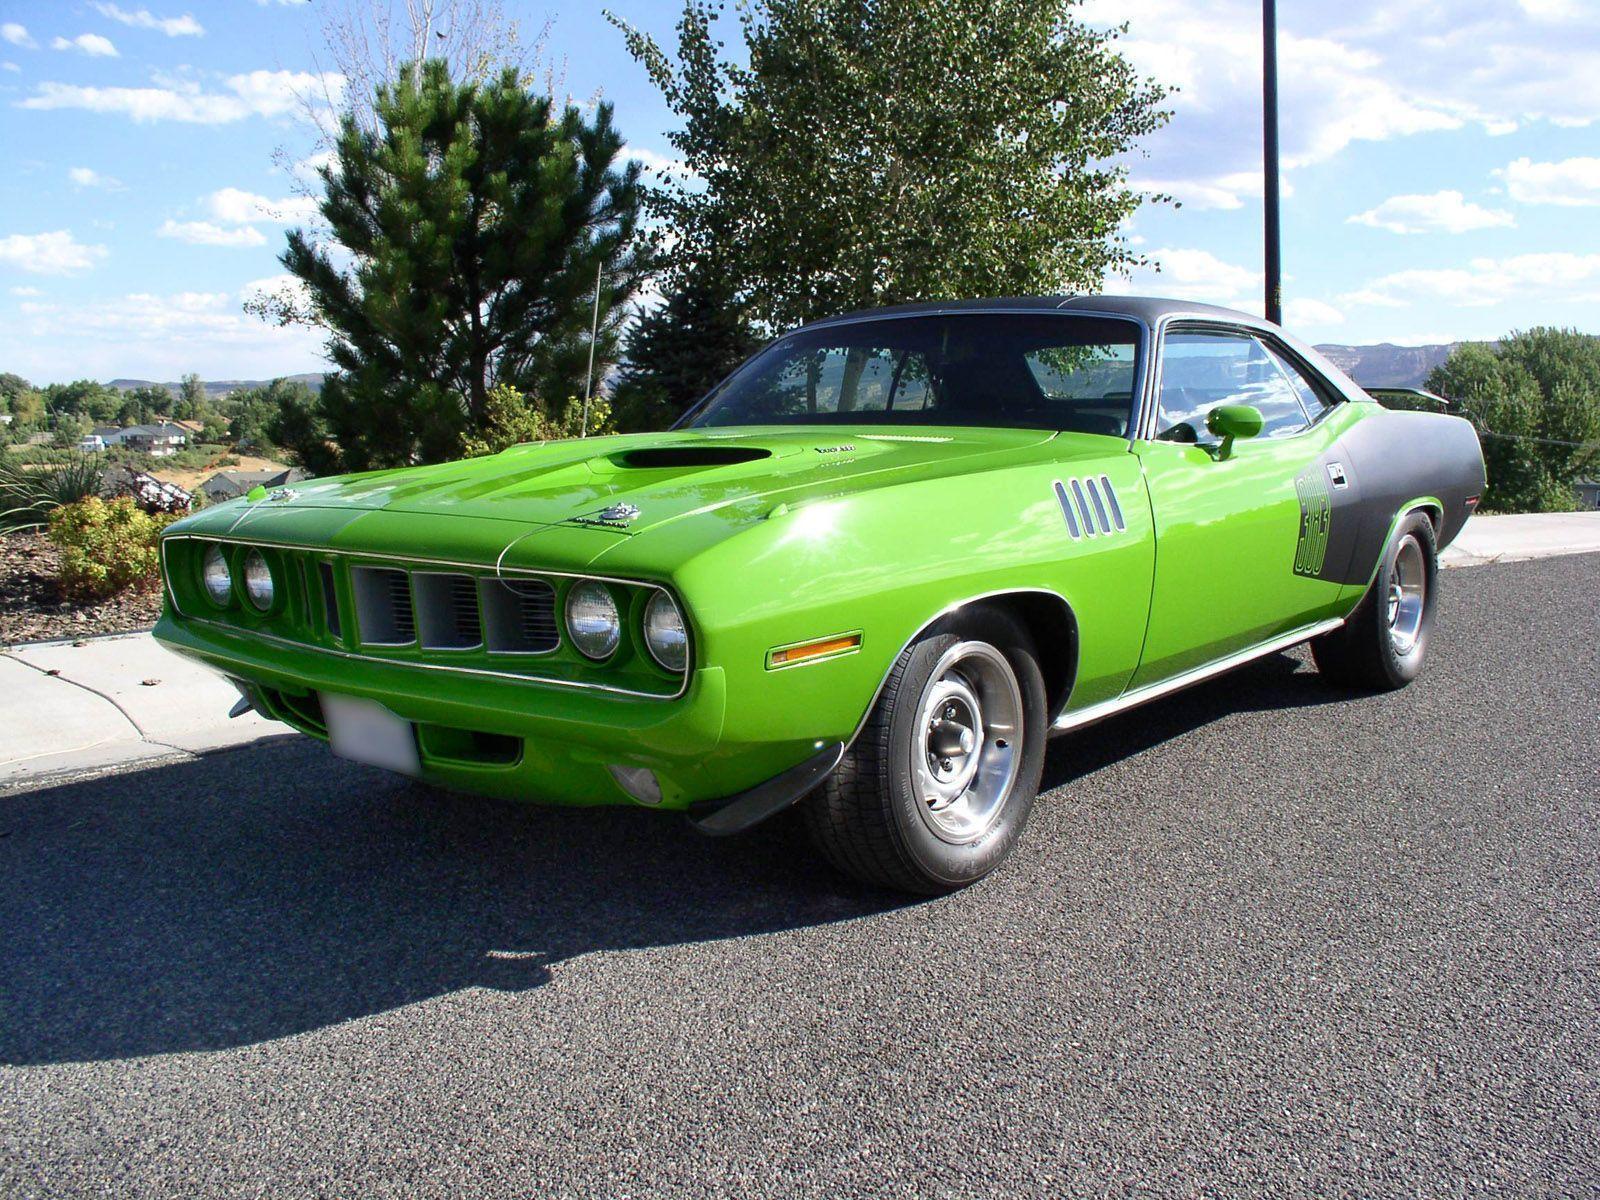 Plymouth Barracuda Convertible Car Picture Picture